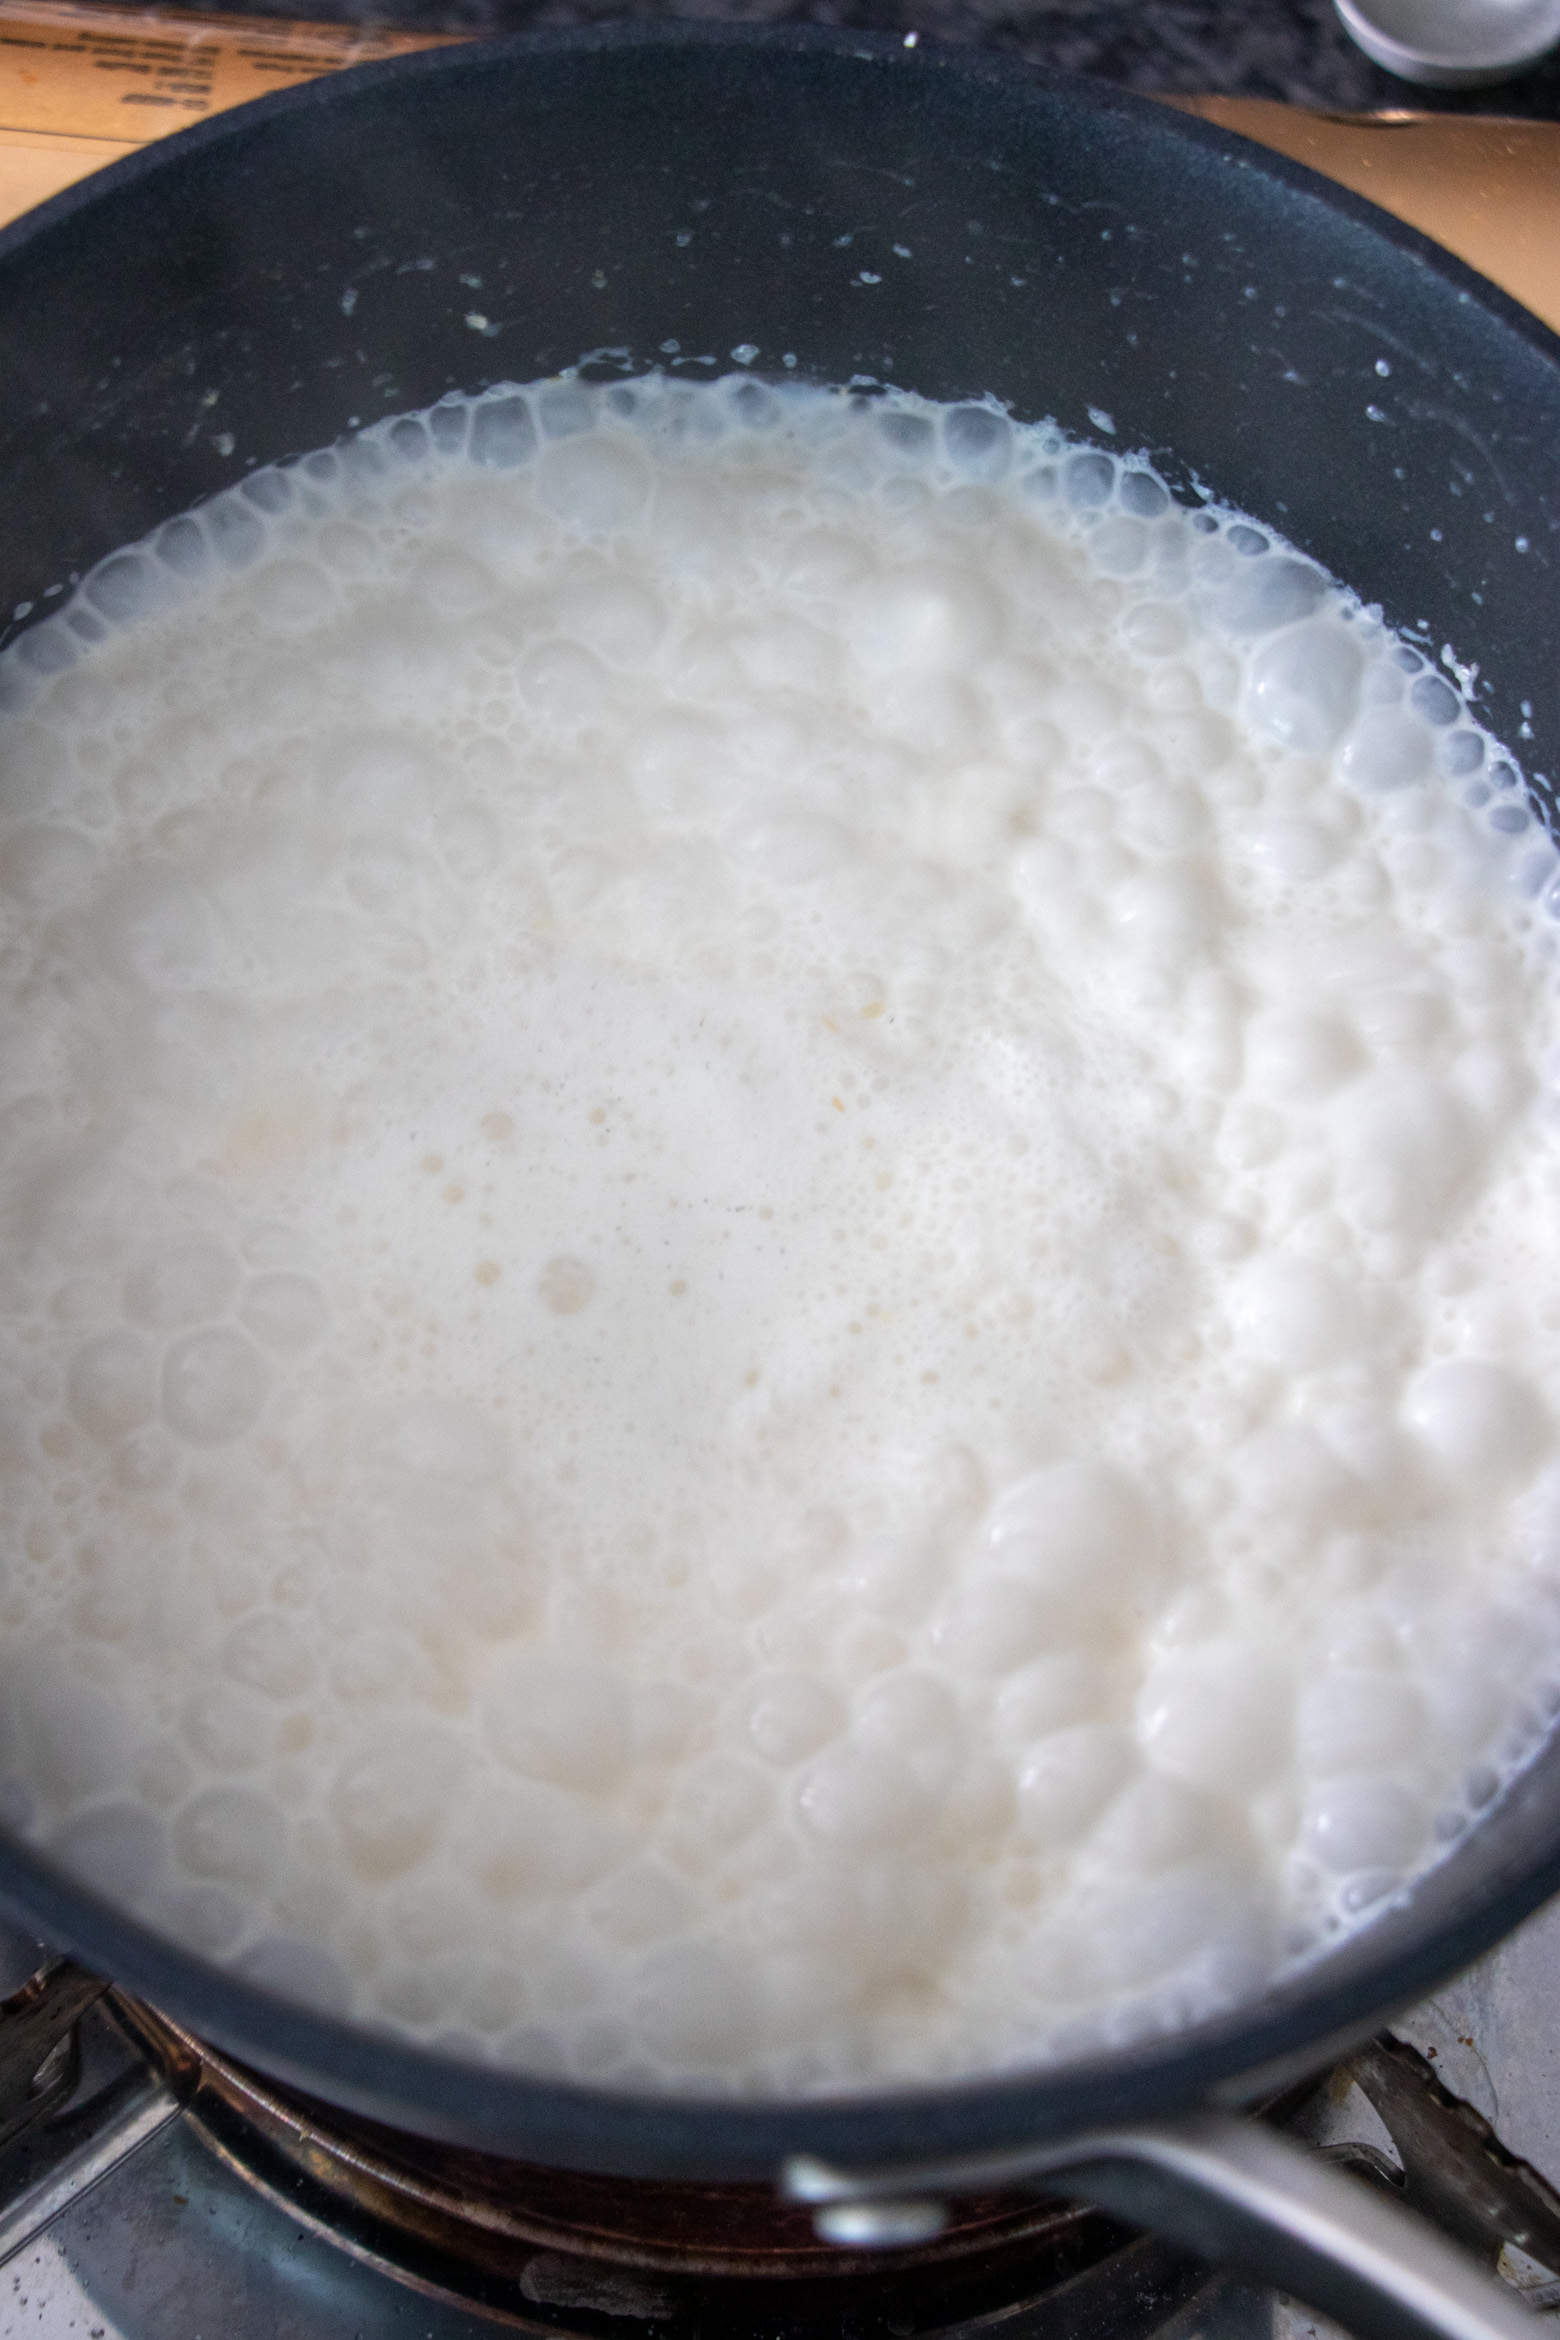 Heavy cream, butter, and water in a pot boiling.